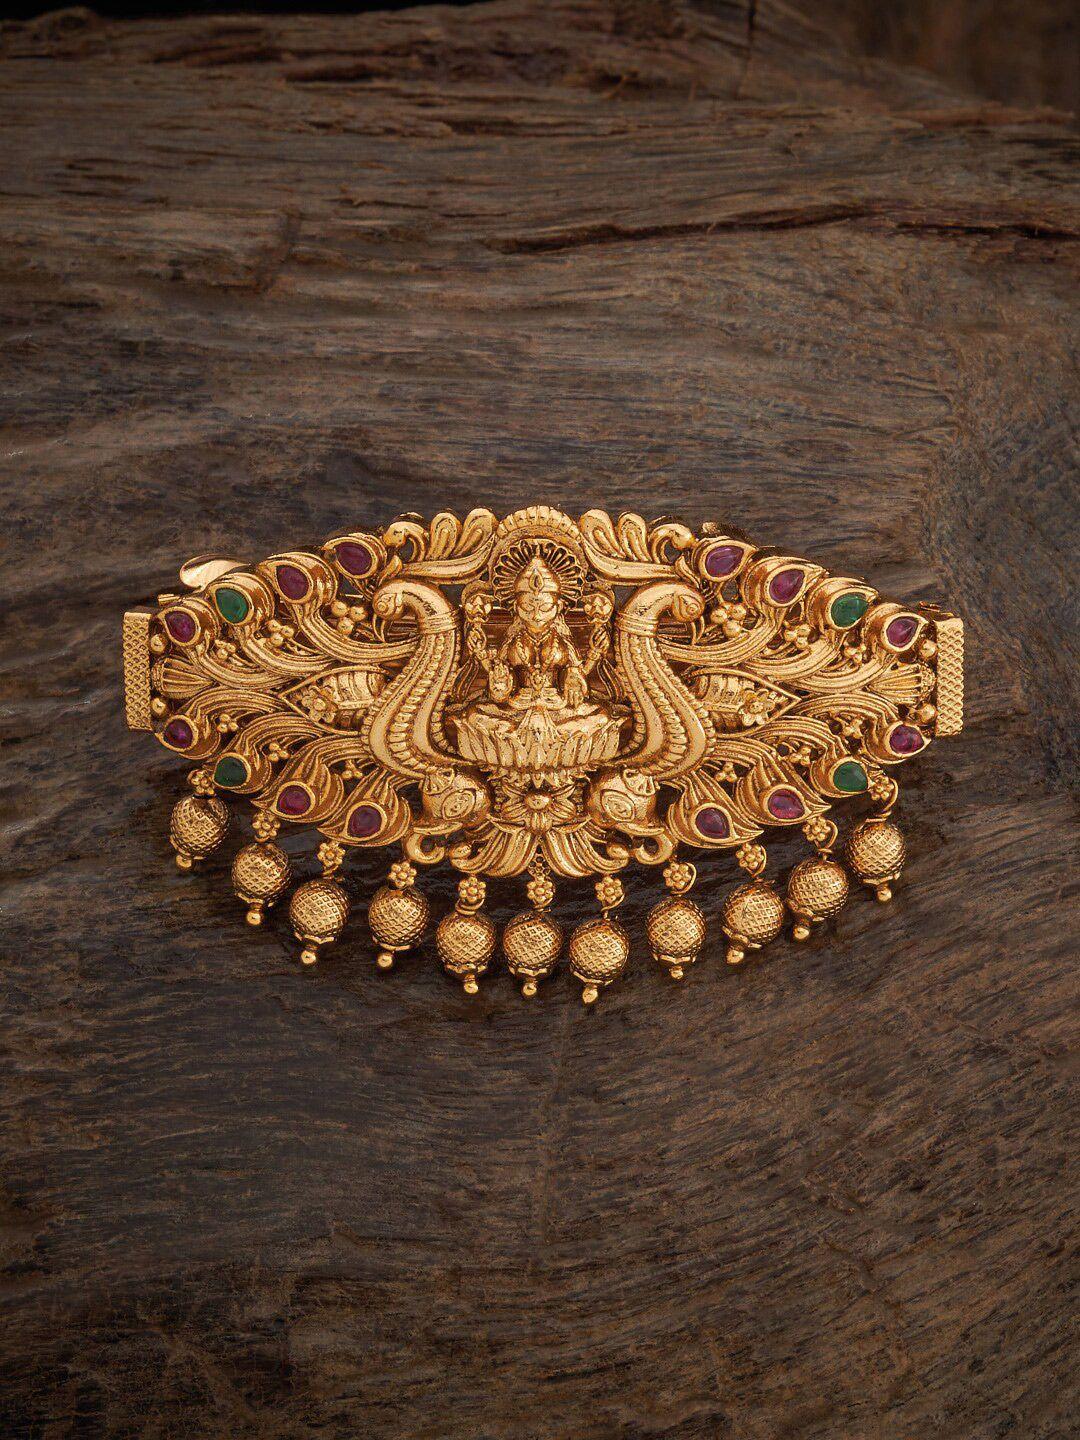 kushal's fashion jewellery gold-plated embellished antique hair french barrette